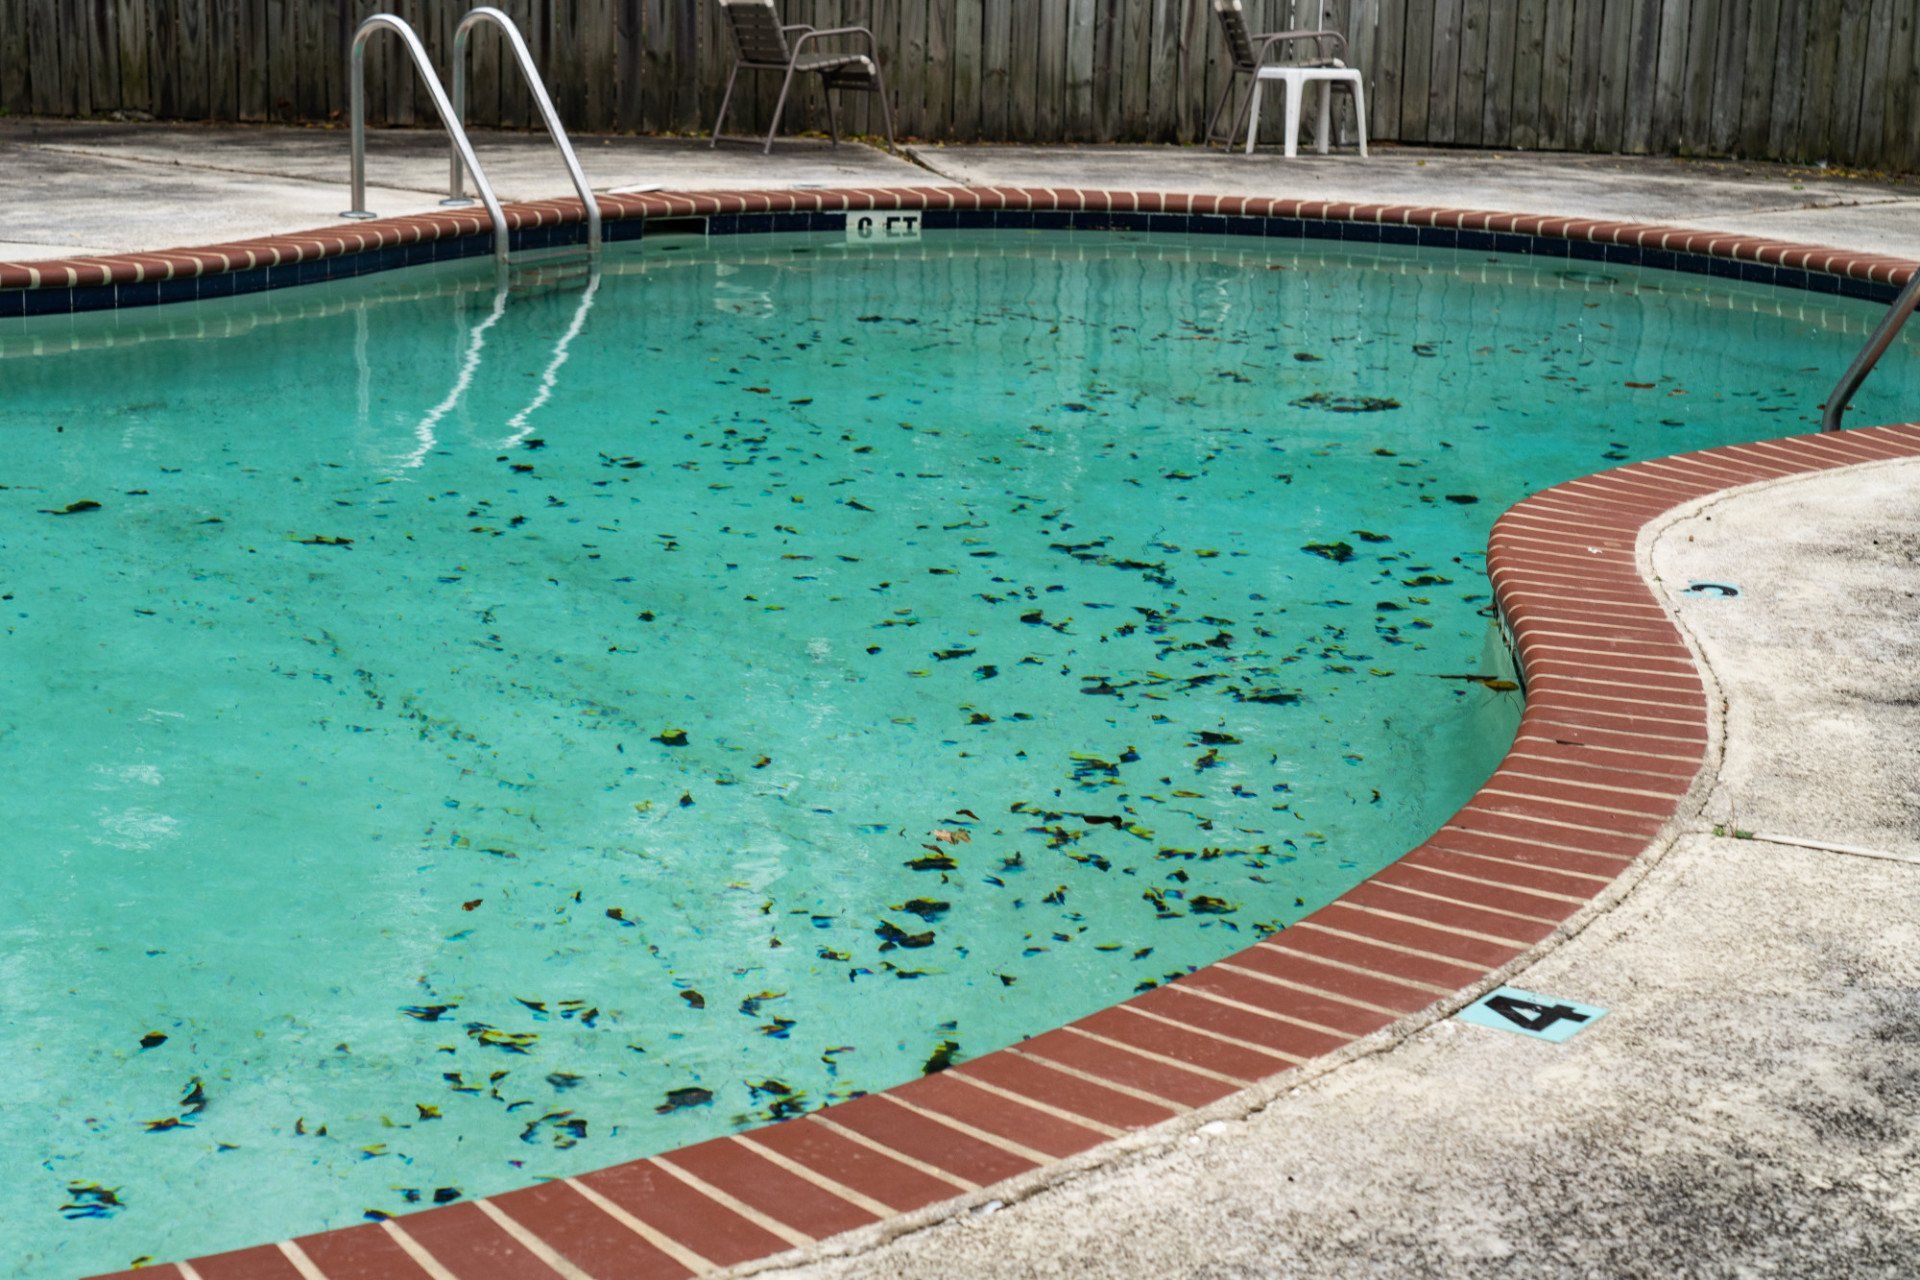 How To Remove Pool Stains Your, How To Remove Hard Water Stains From Swimming Pool Tile